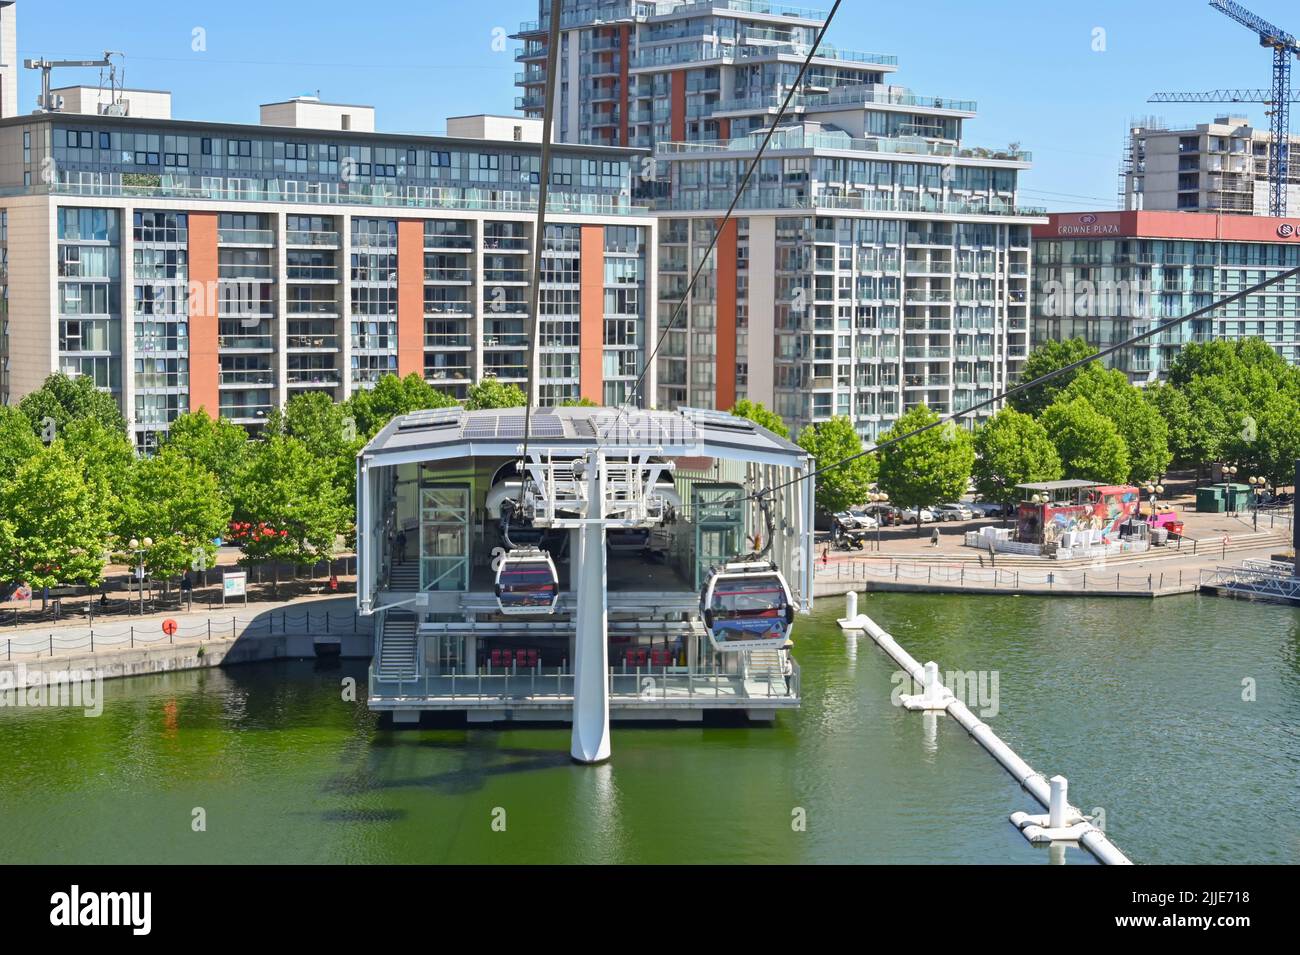 London, United Kingdom - June 2022: Carriage on the Emirates Skyline aerial cable car system descending to the base station. Stock Photo